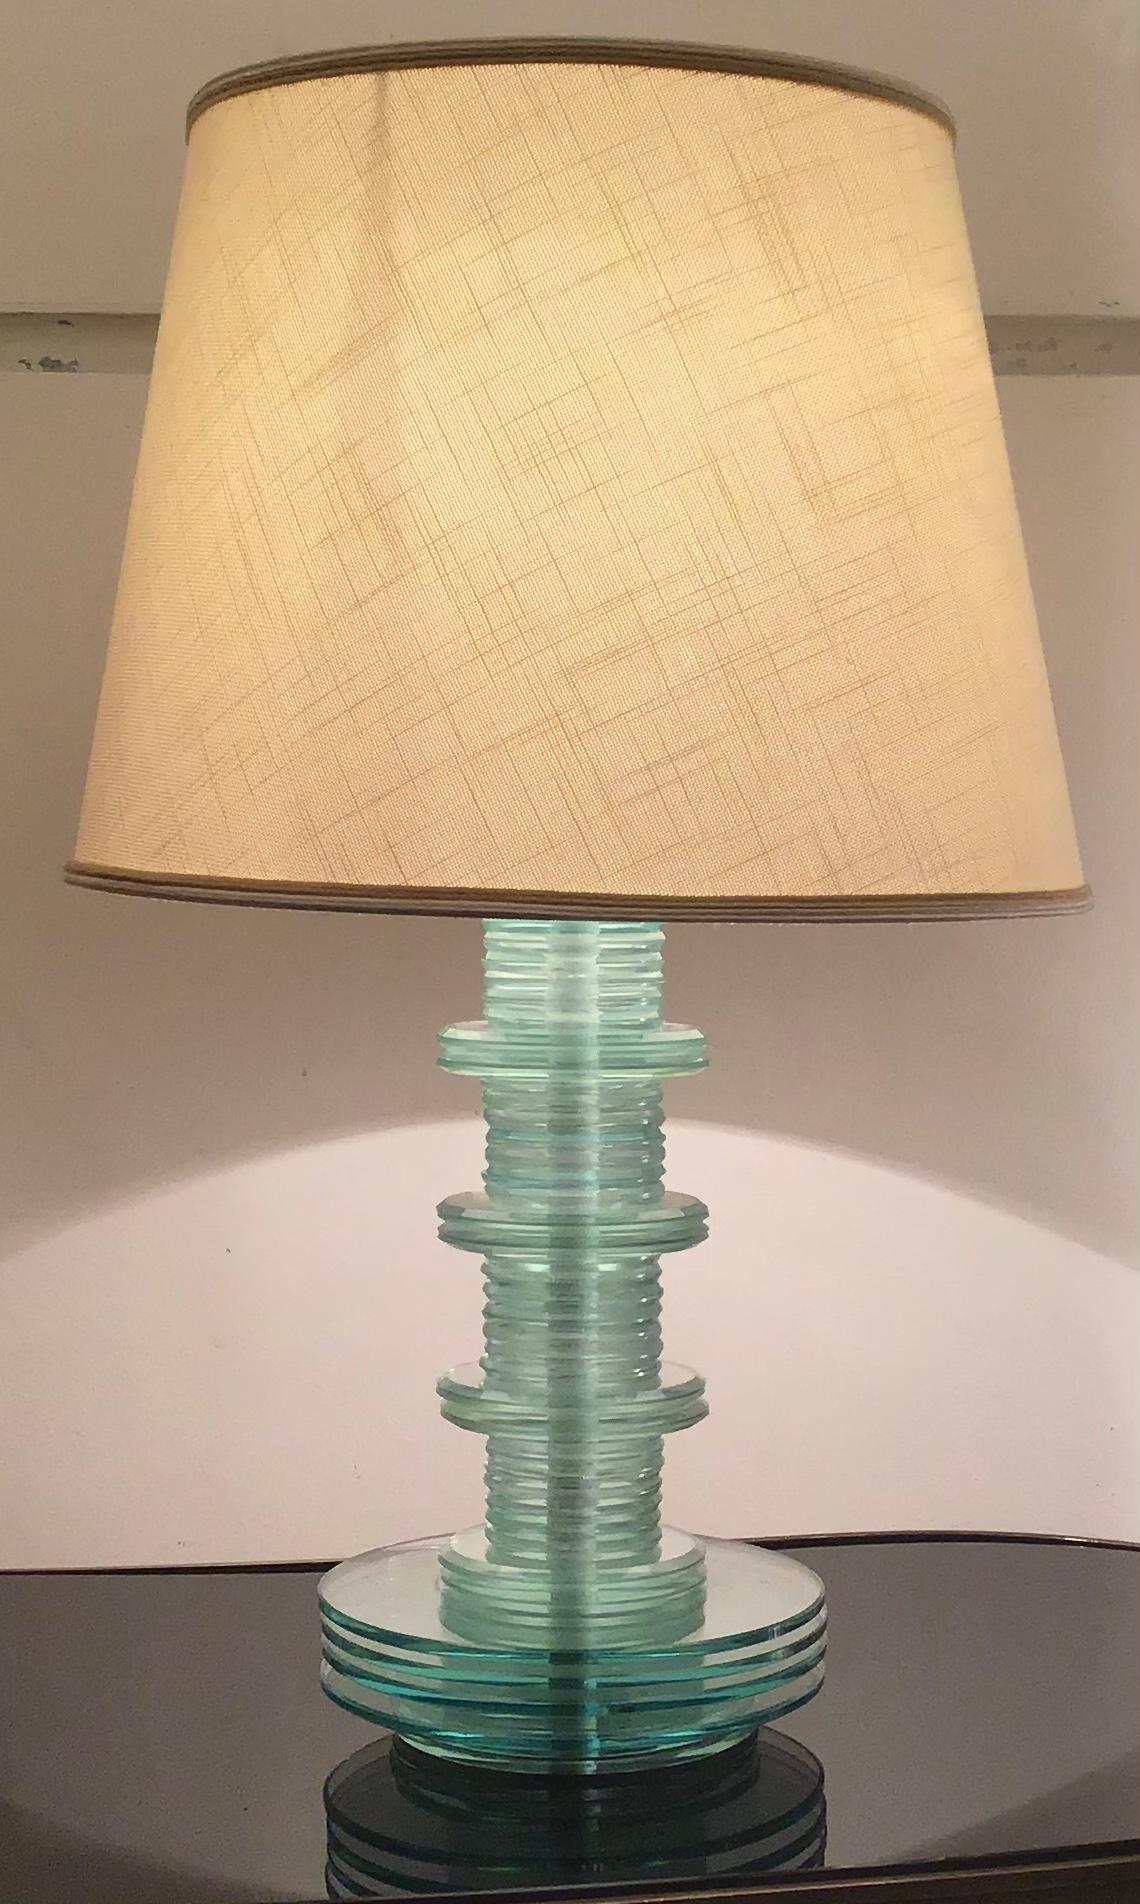 Cristal art table lamp glass iron fabric lampshade, 1960, Italy.